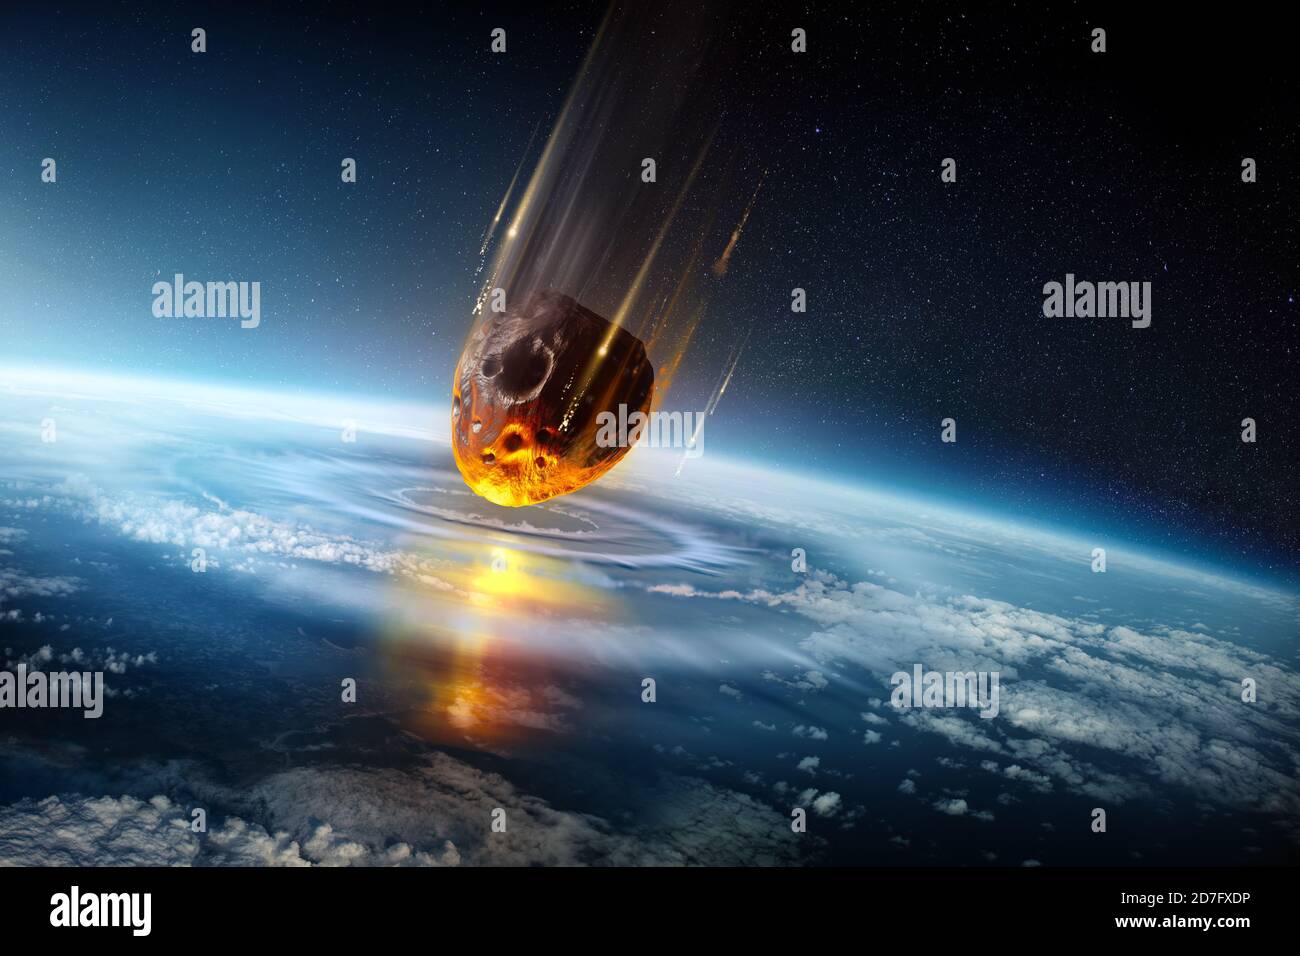 A huge city sized meteor slams into the earth's atmosphere creating shock waves. Mass extinction meteor strike event 3D science illustration. Stock Photo